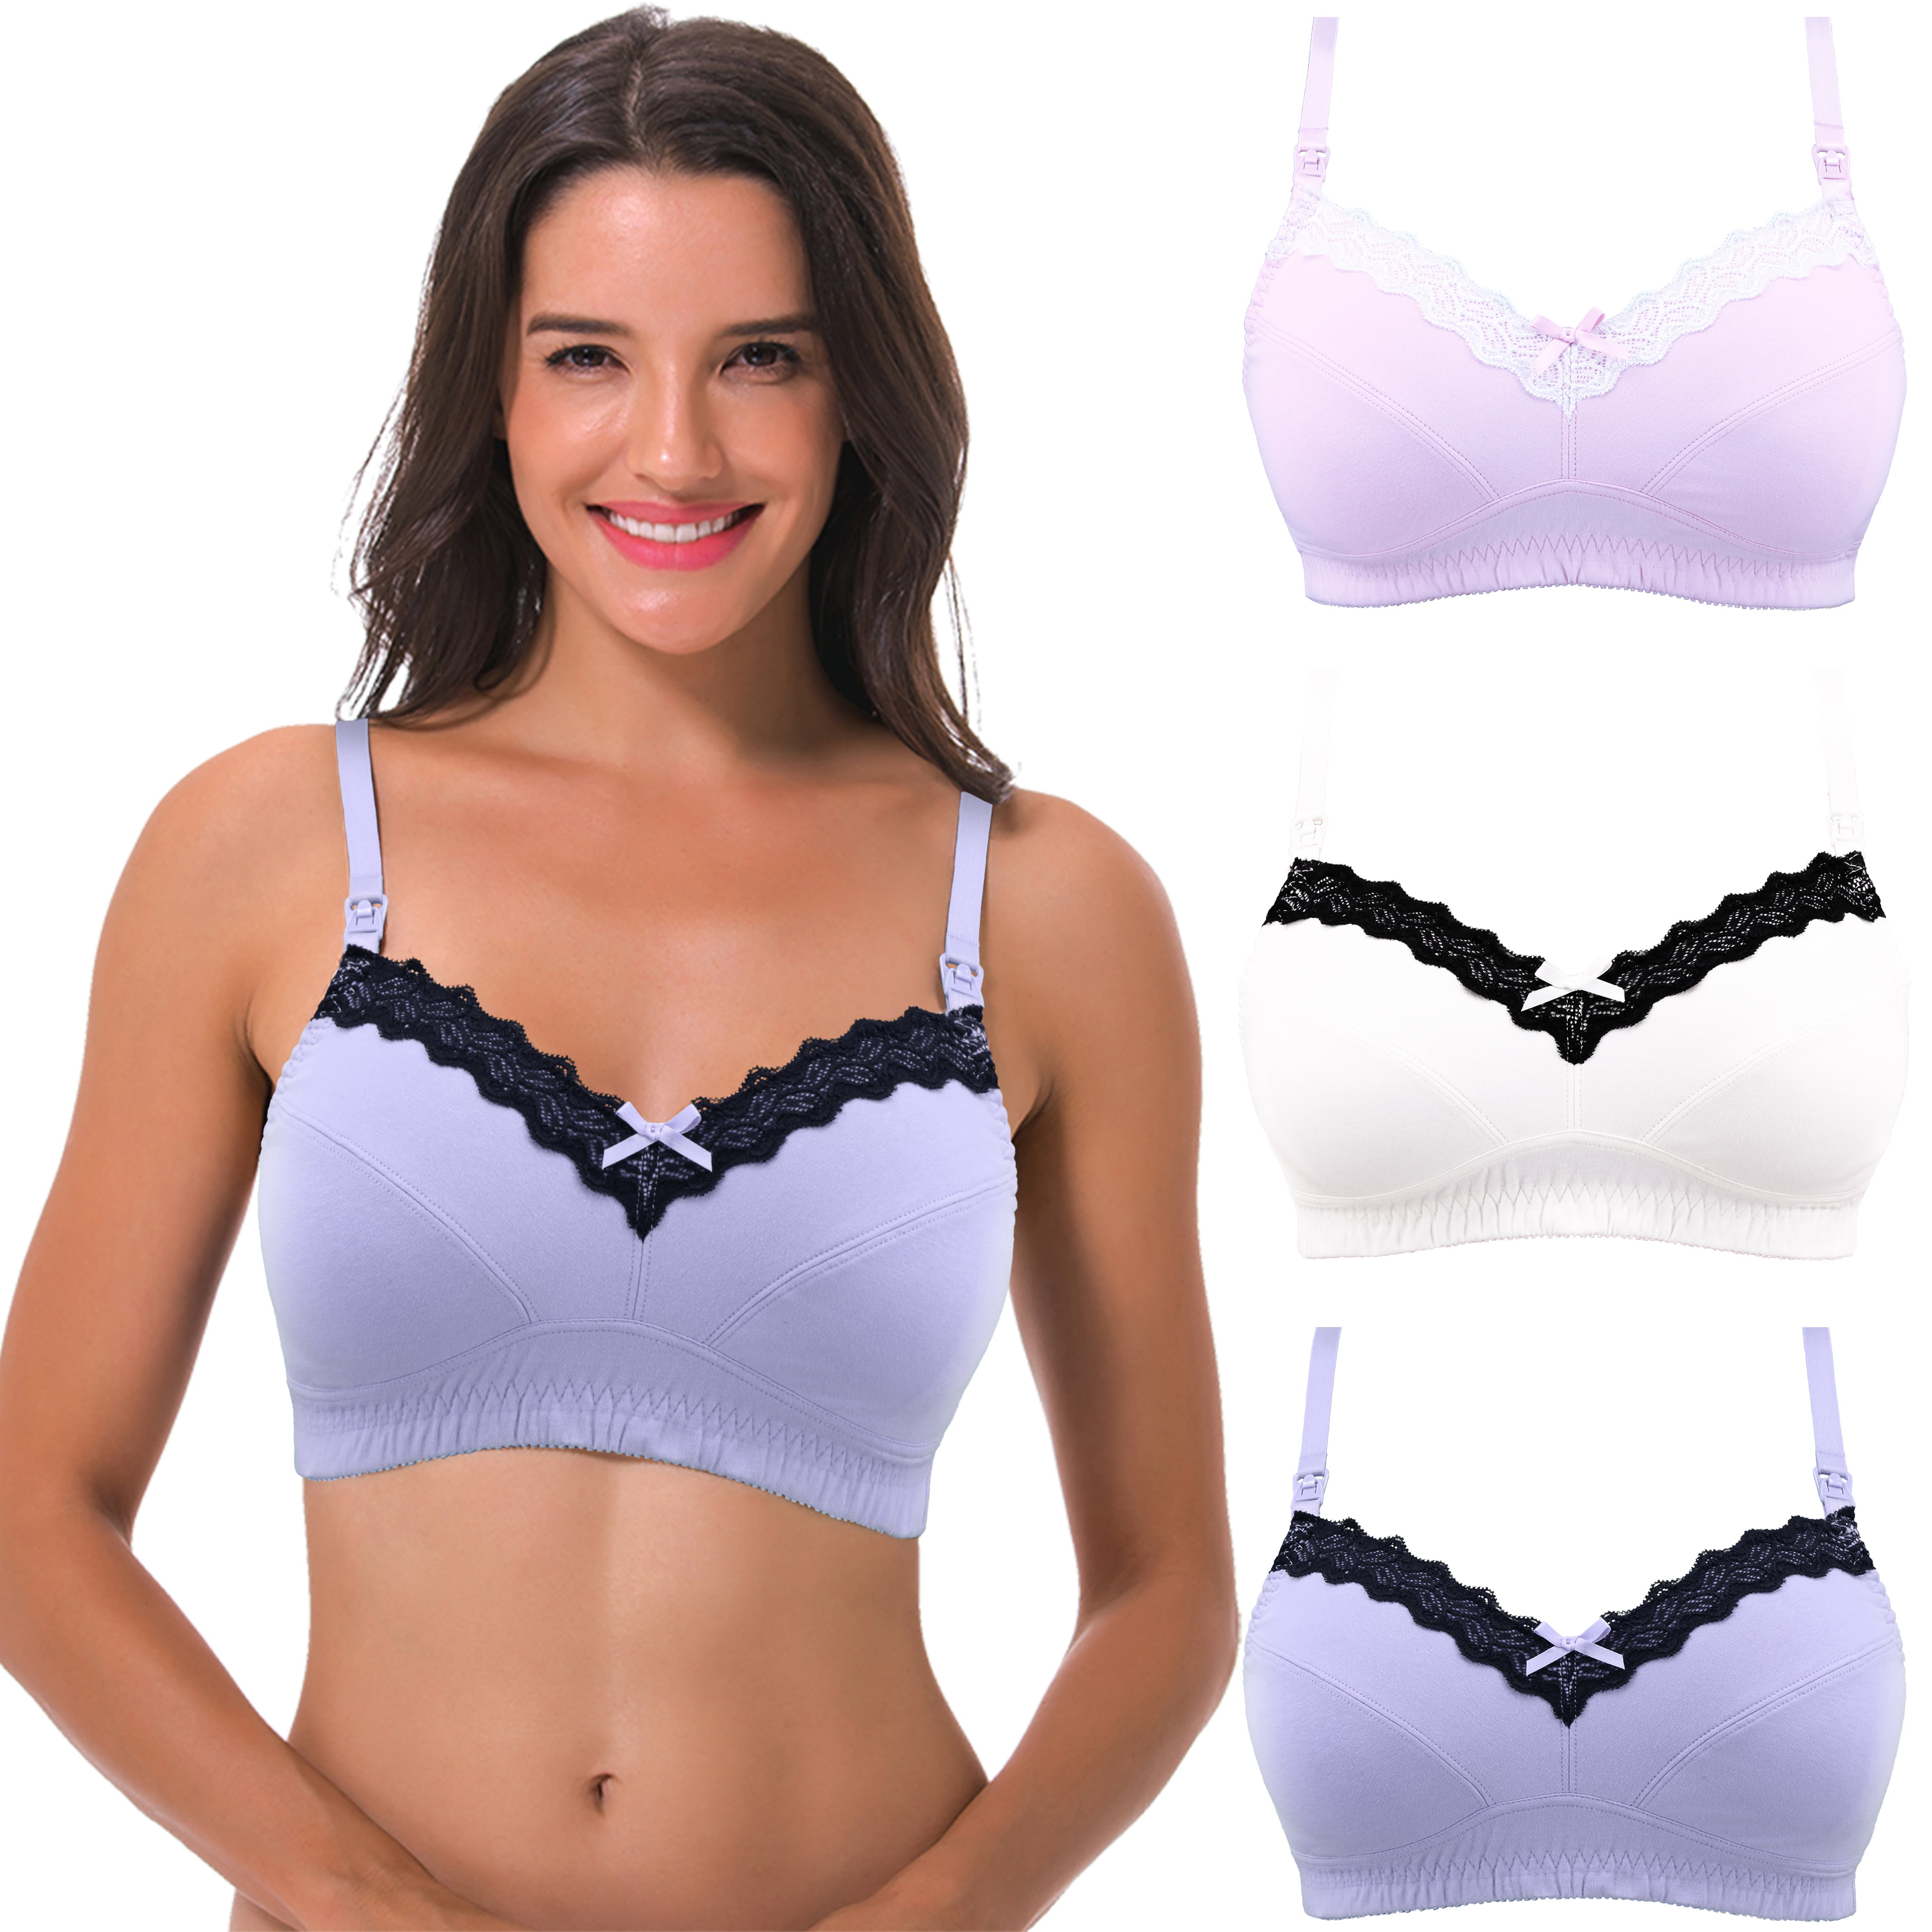 Curve Muse Women's Nursing Plus Size Wirefree Cotton Bra With Upper Lace -3Pack-LAVENDER,PINK,IVORY-38C 